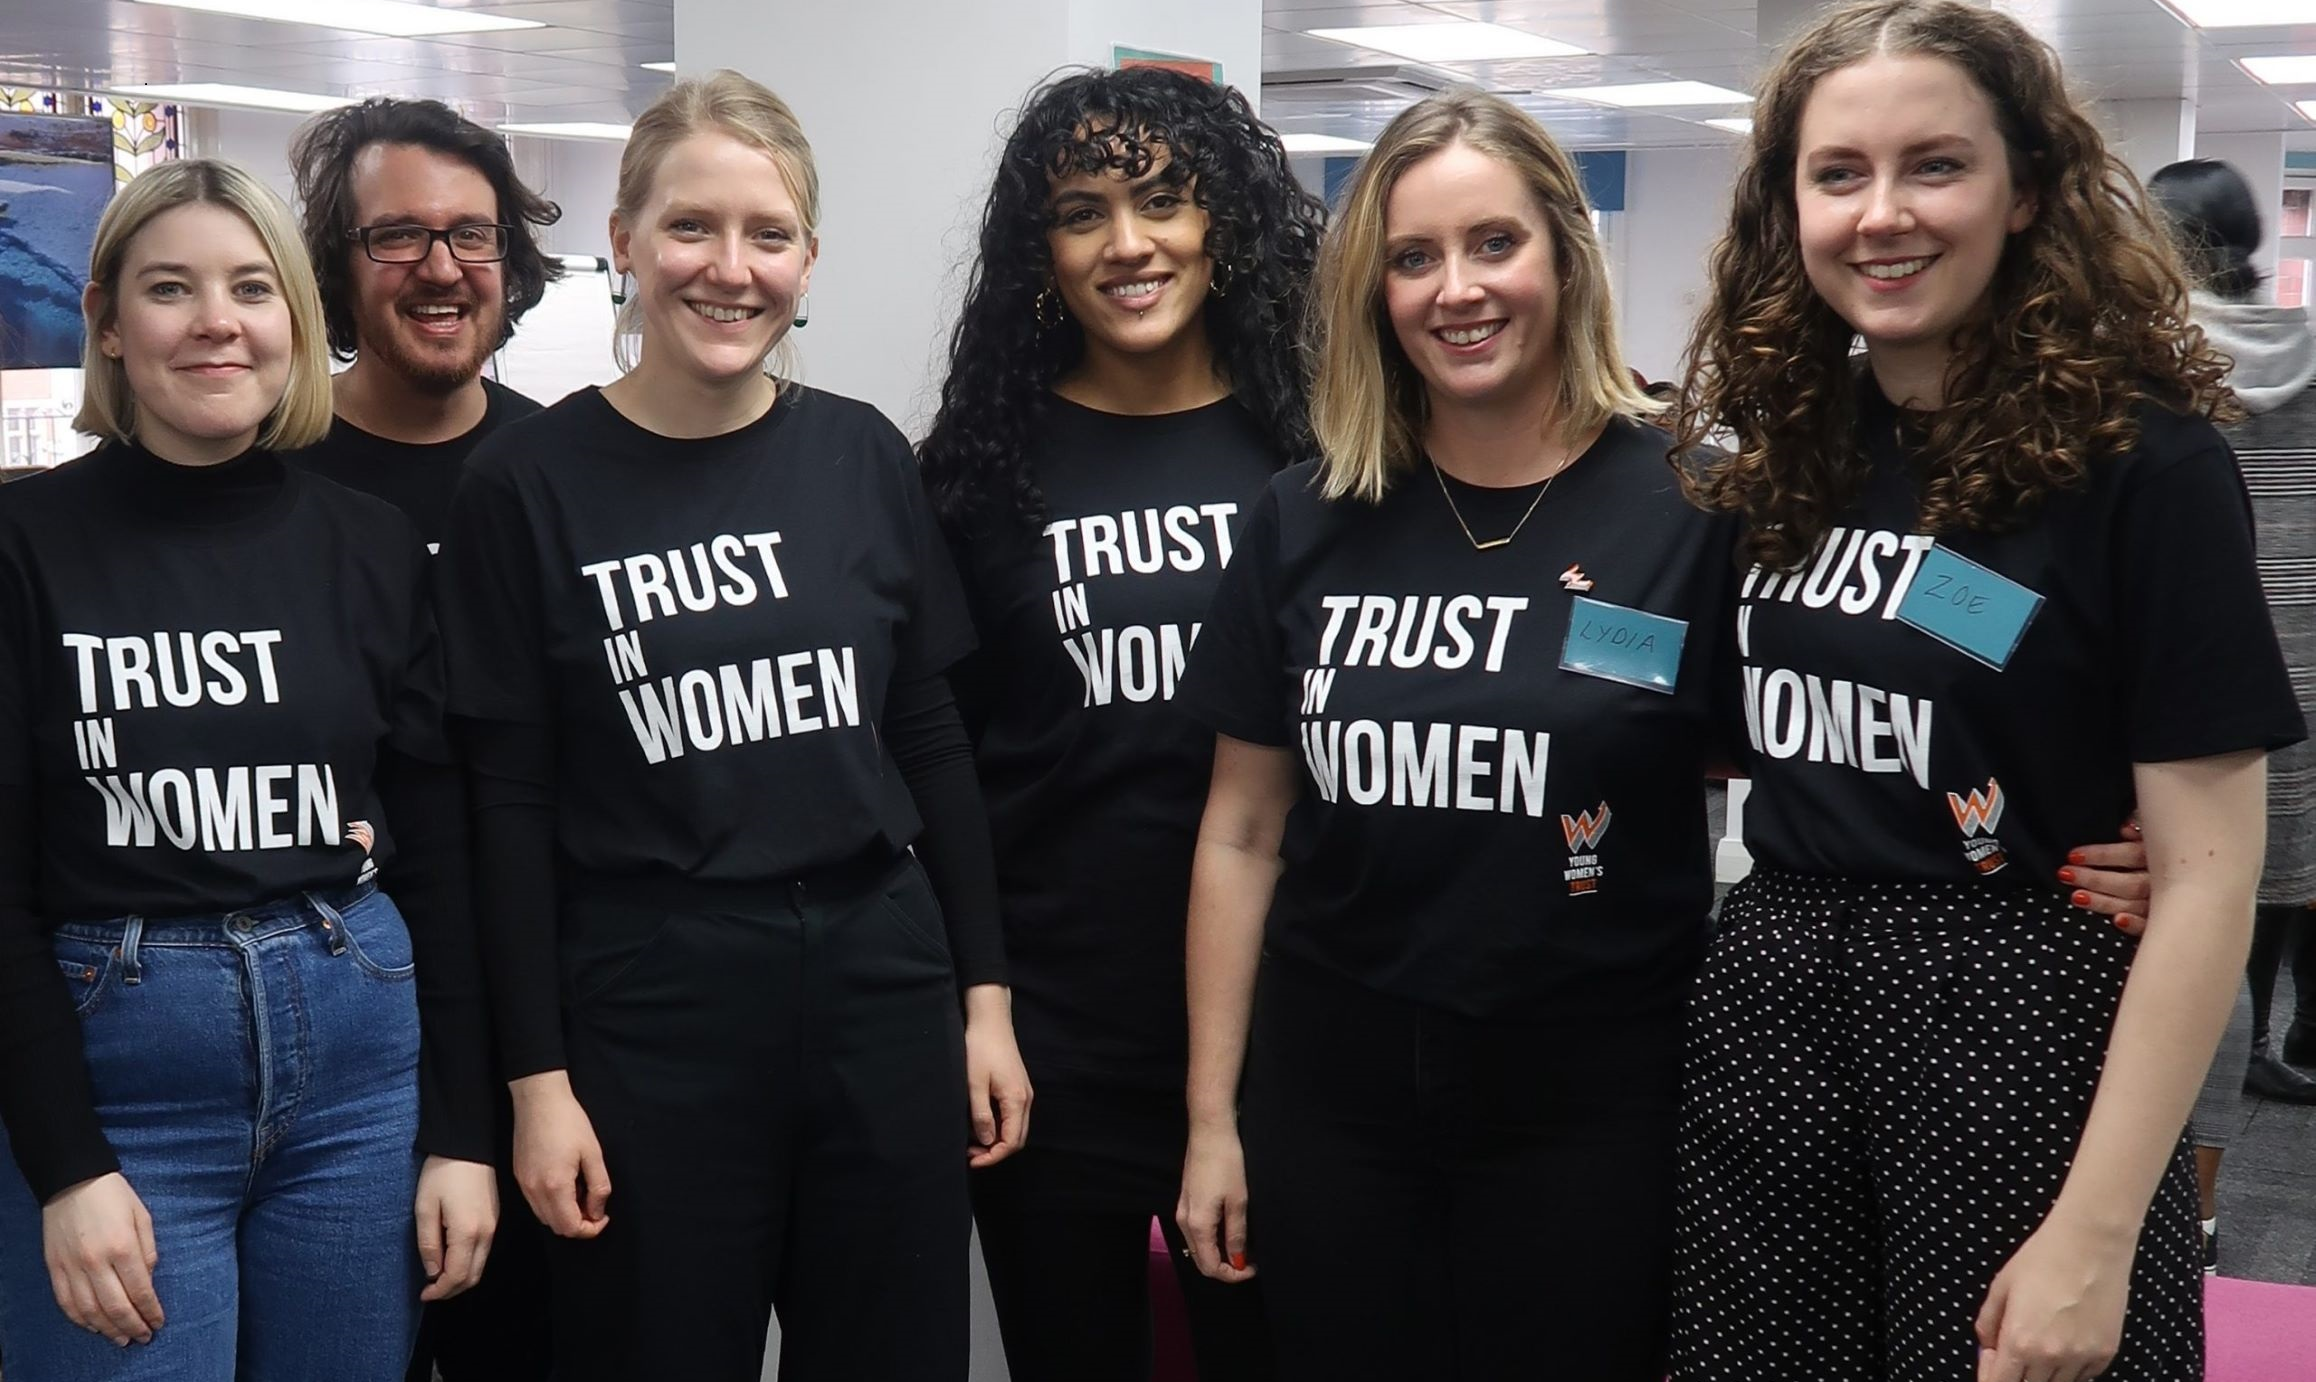 Young Women's Trust team at an event